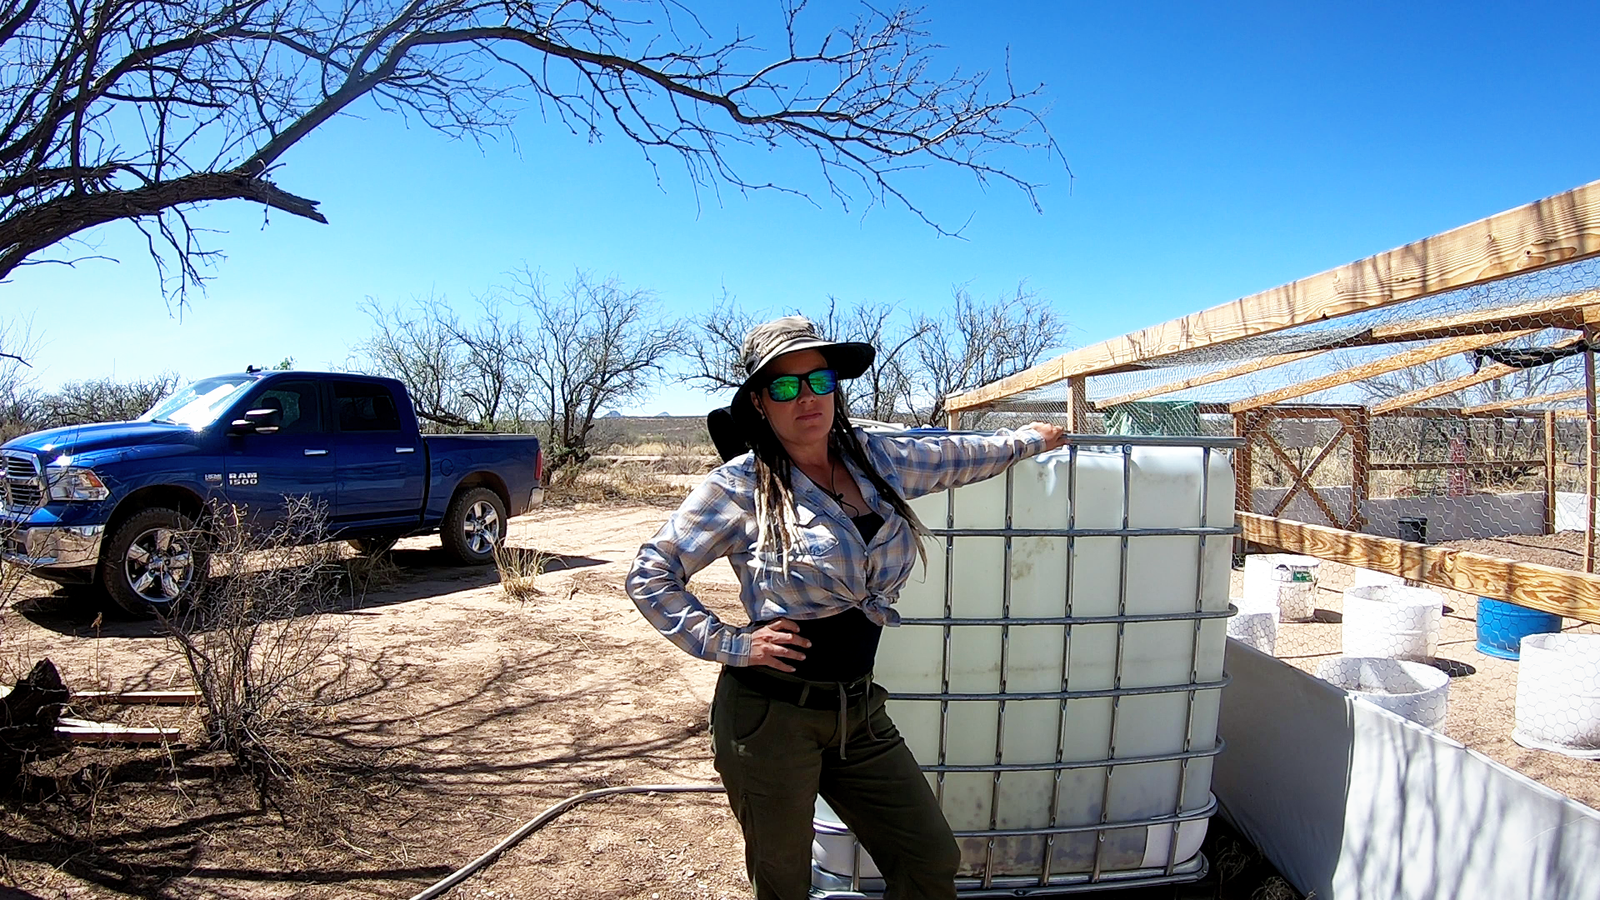 Regina with off grid water tank